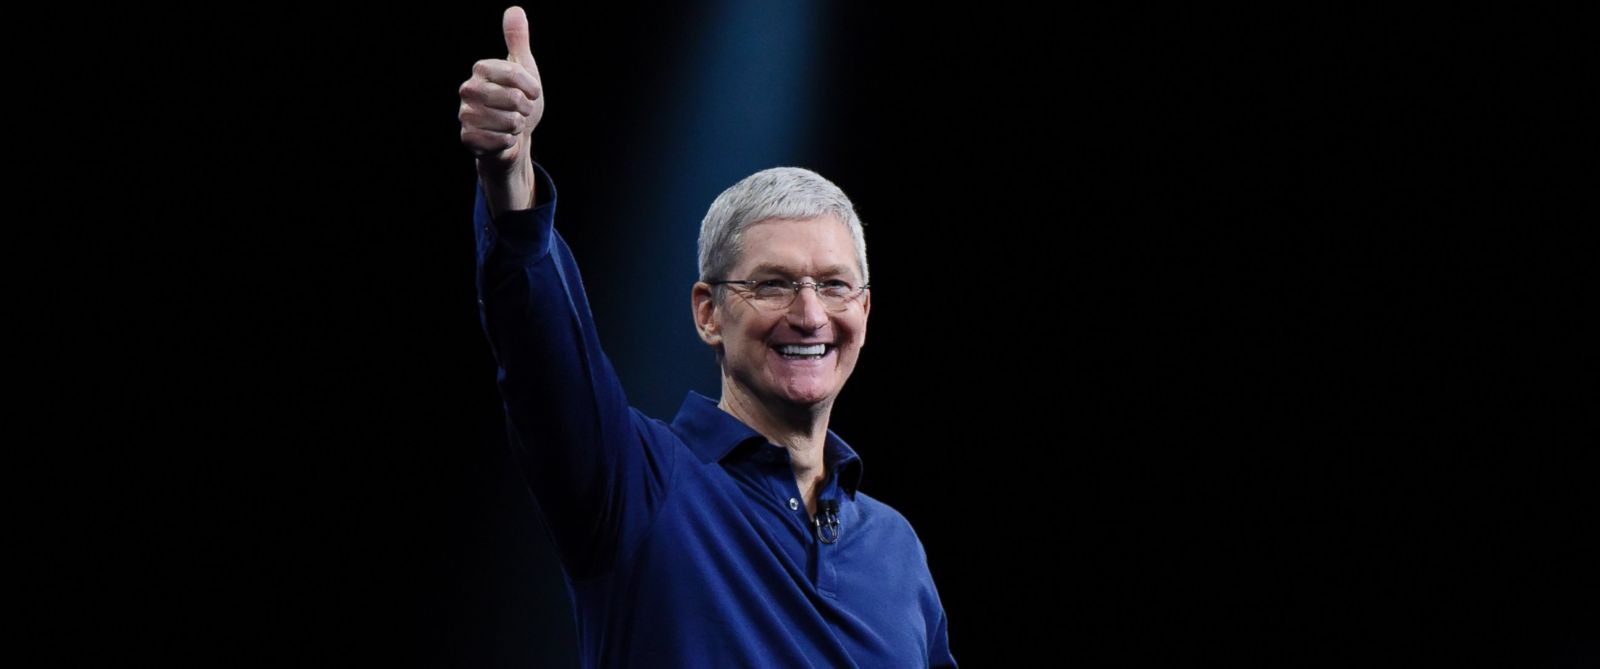 cook apple ceo tax cuts services